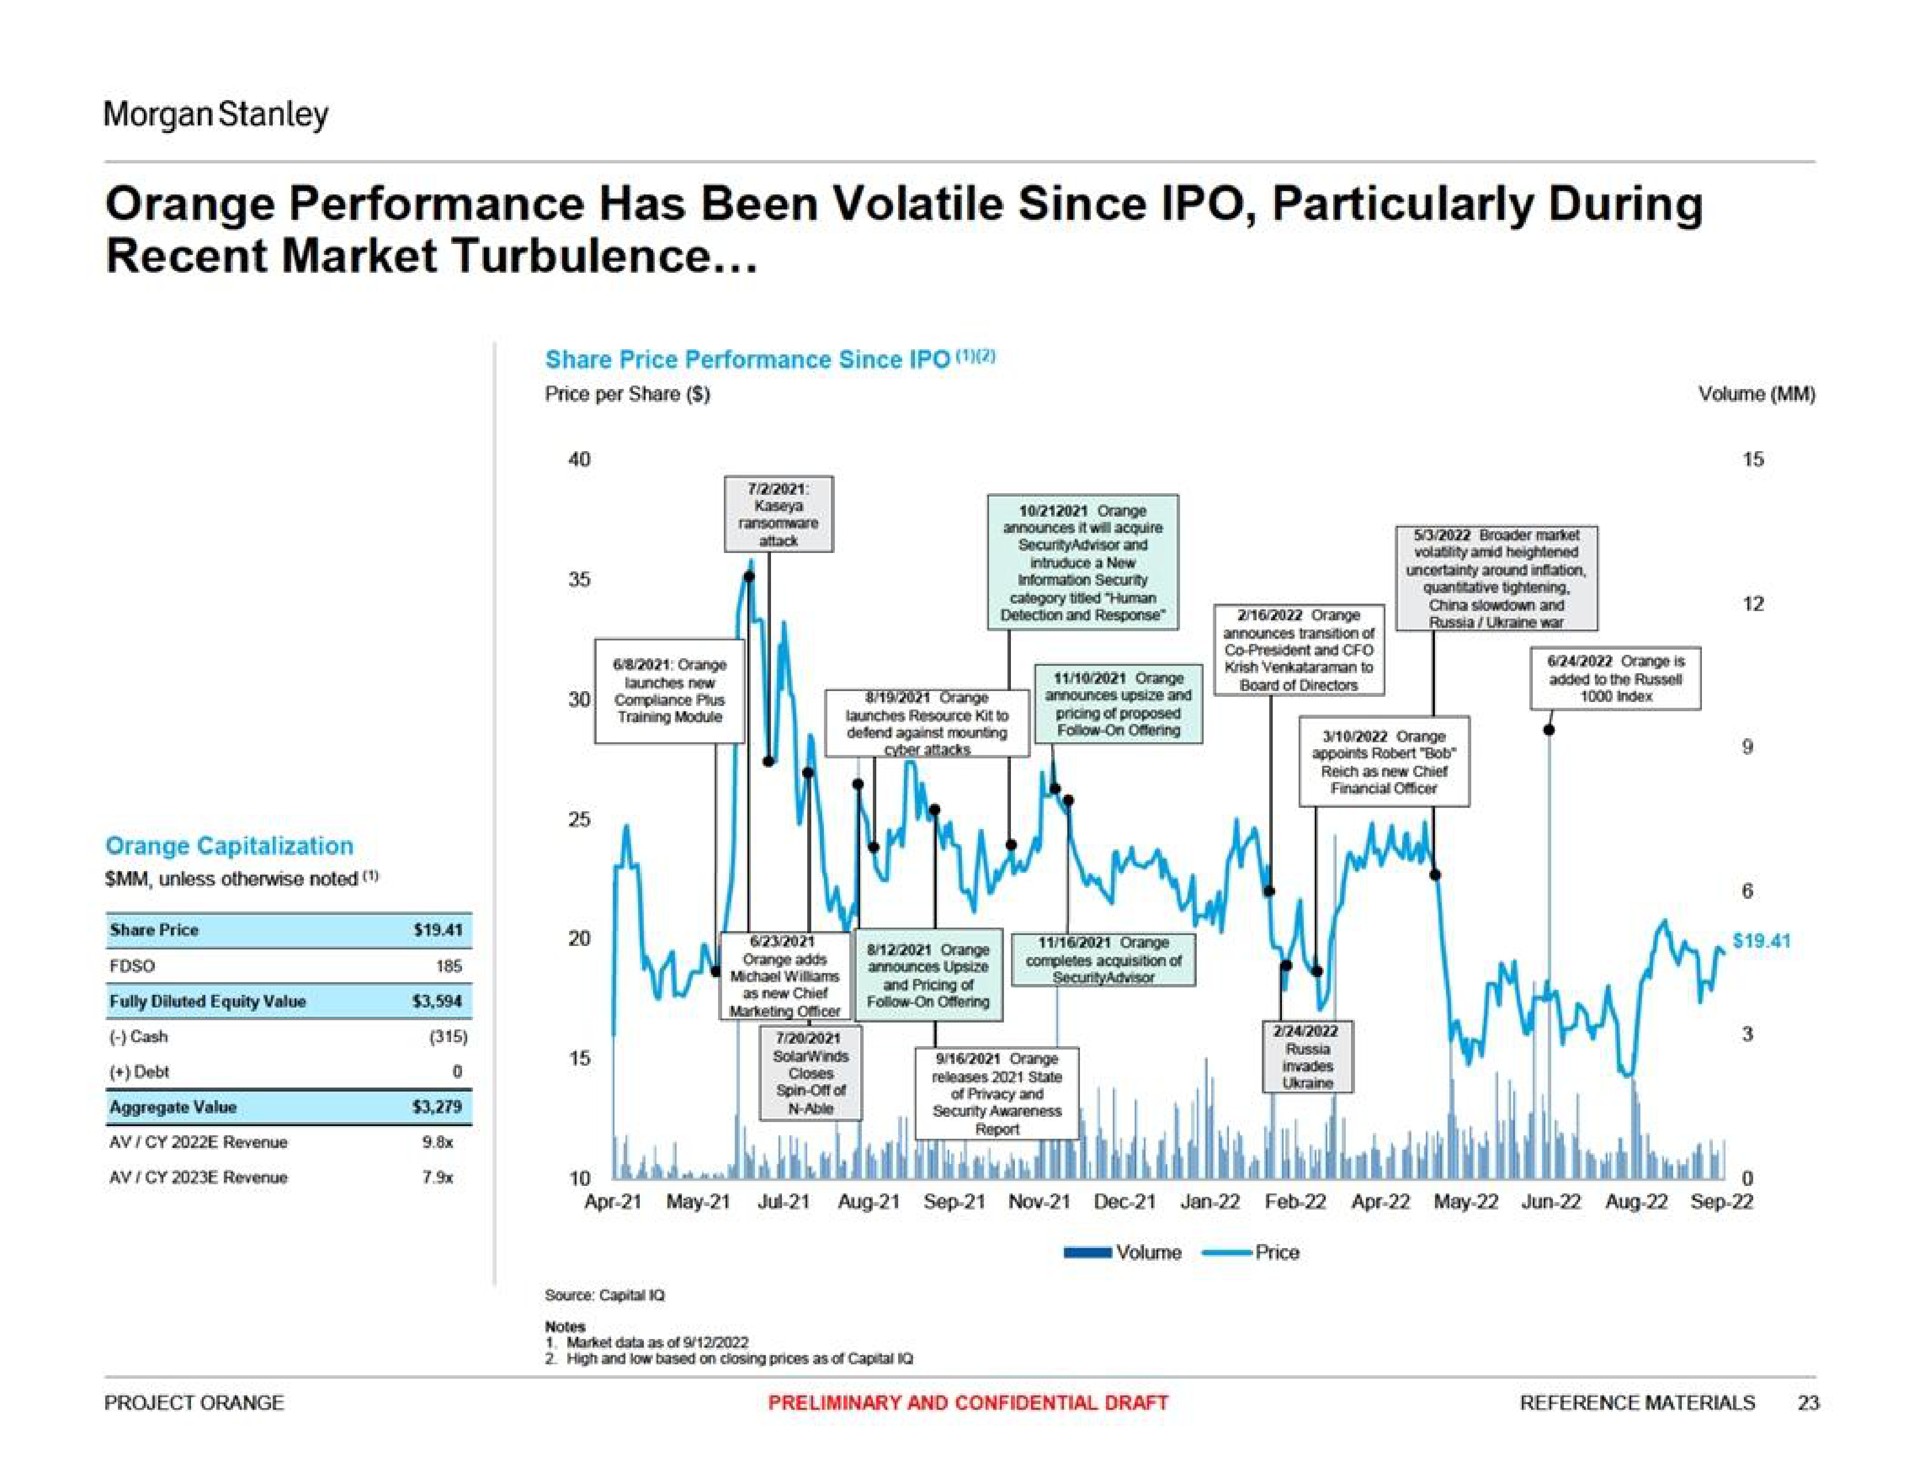 orange performance has been volatile since particularly during recent market turbulence | Morgan Stanley